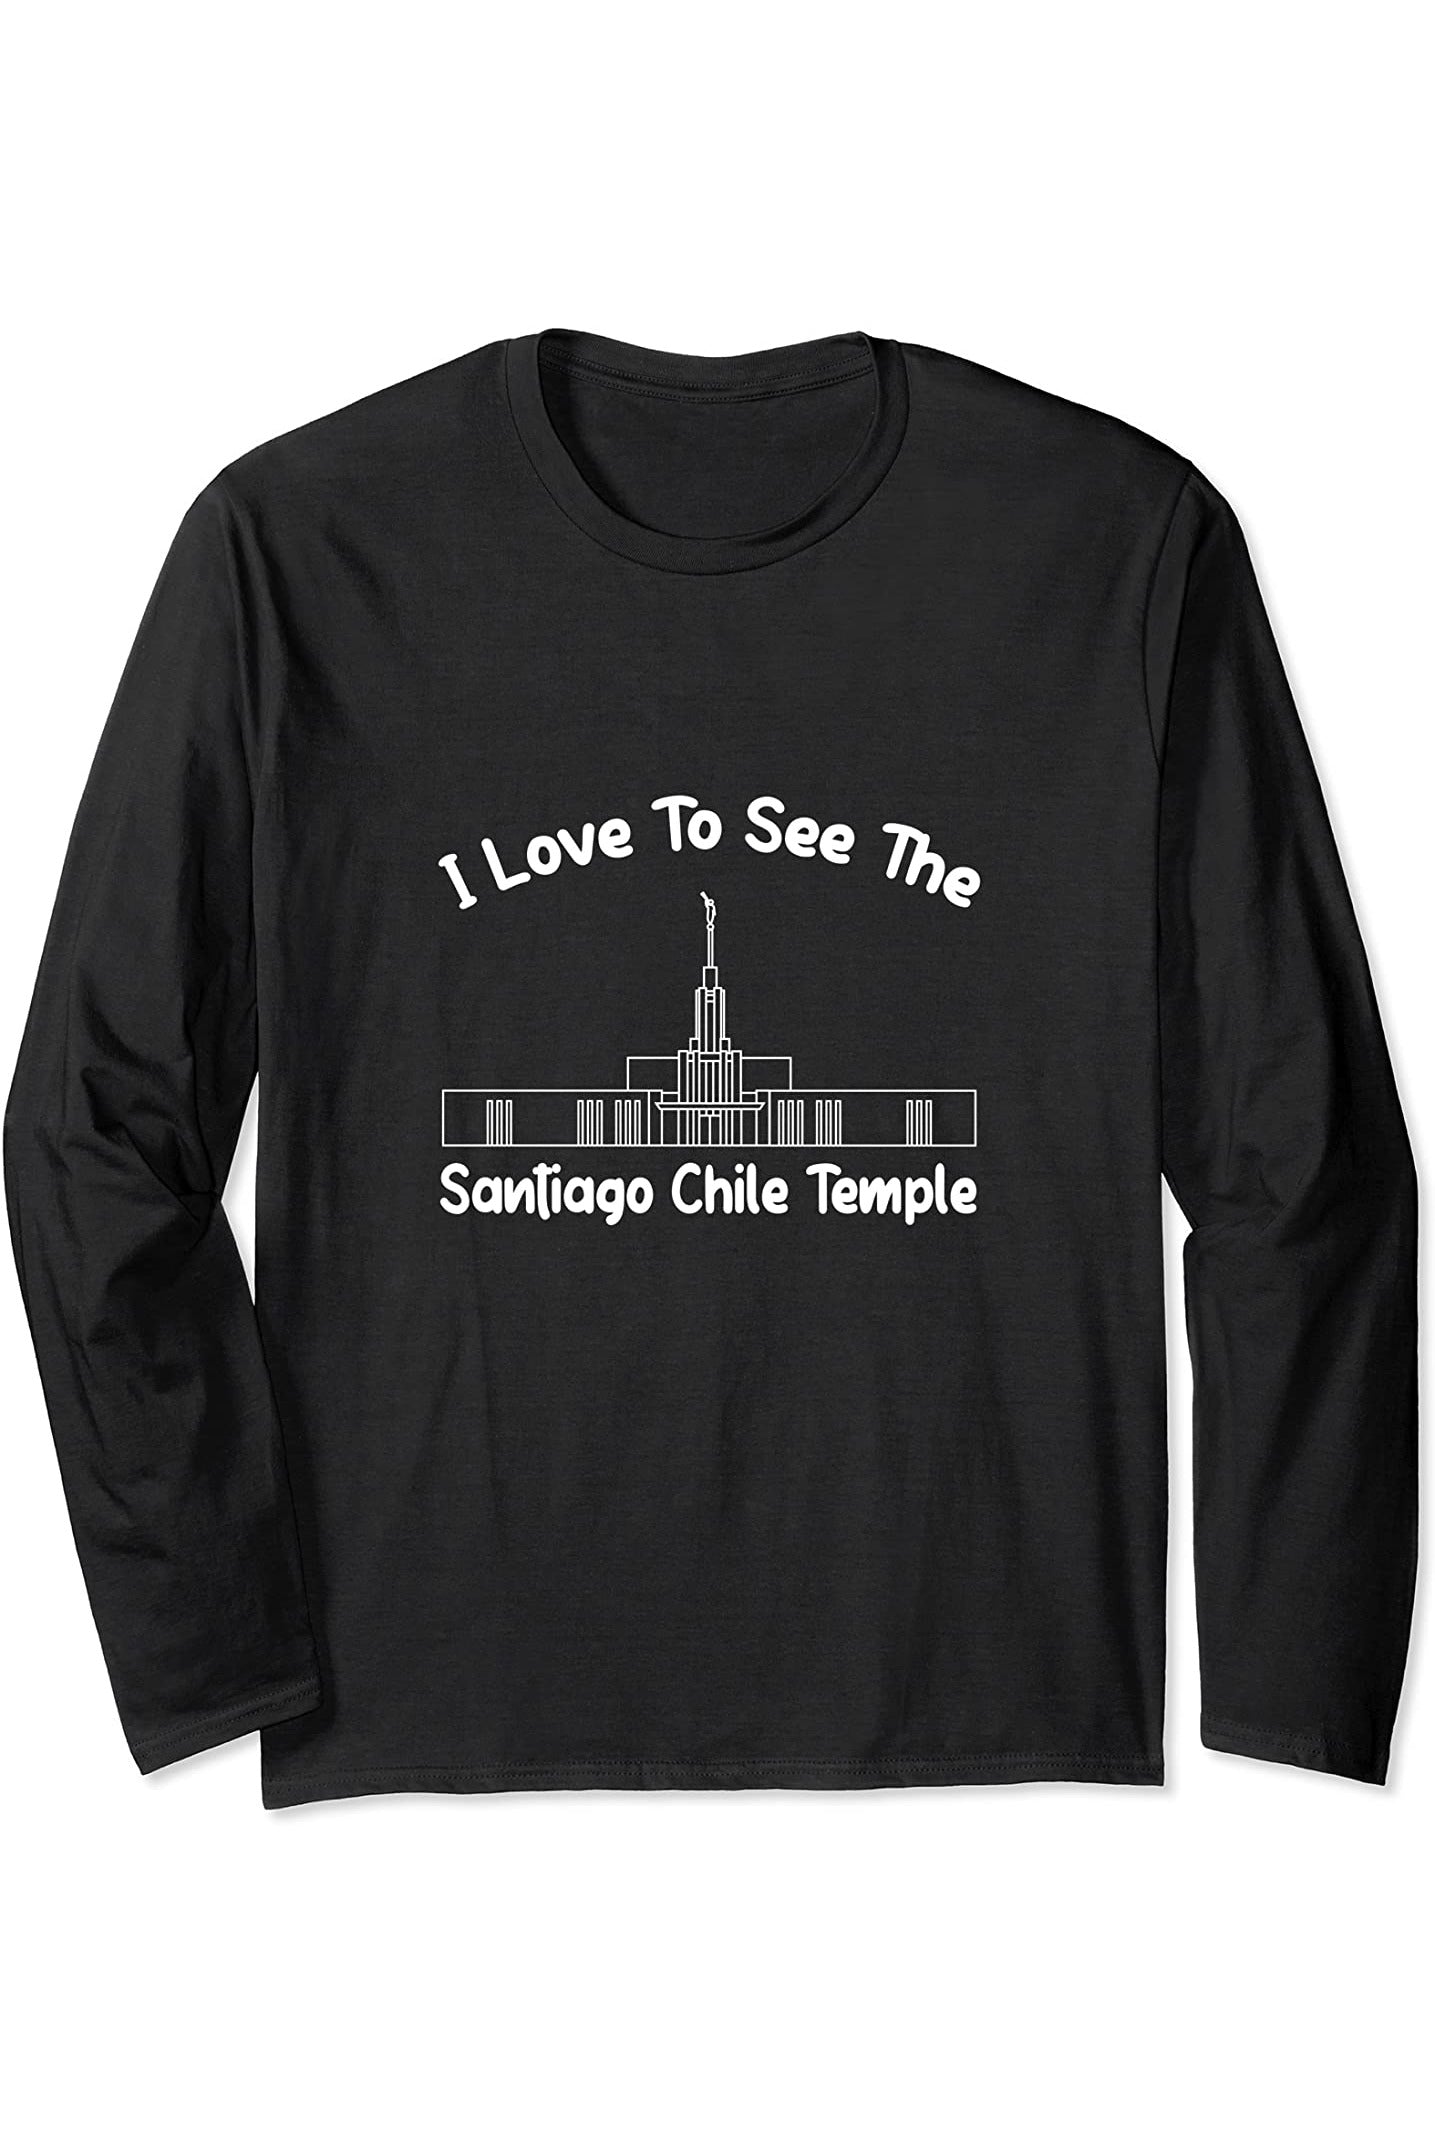 Santiago Chile Temple Long Sleeve T-Shirt - Primary Style (English) US